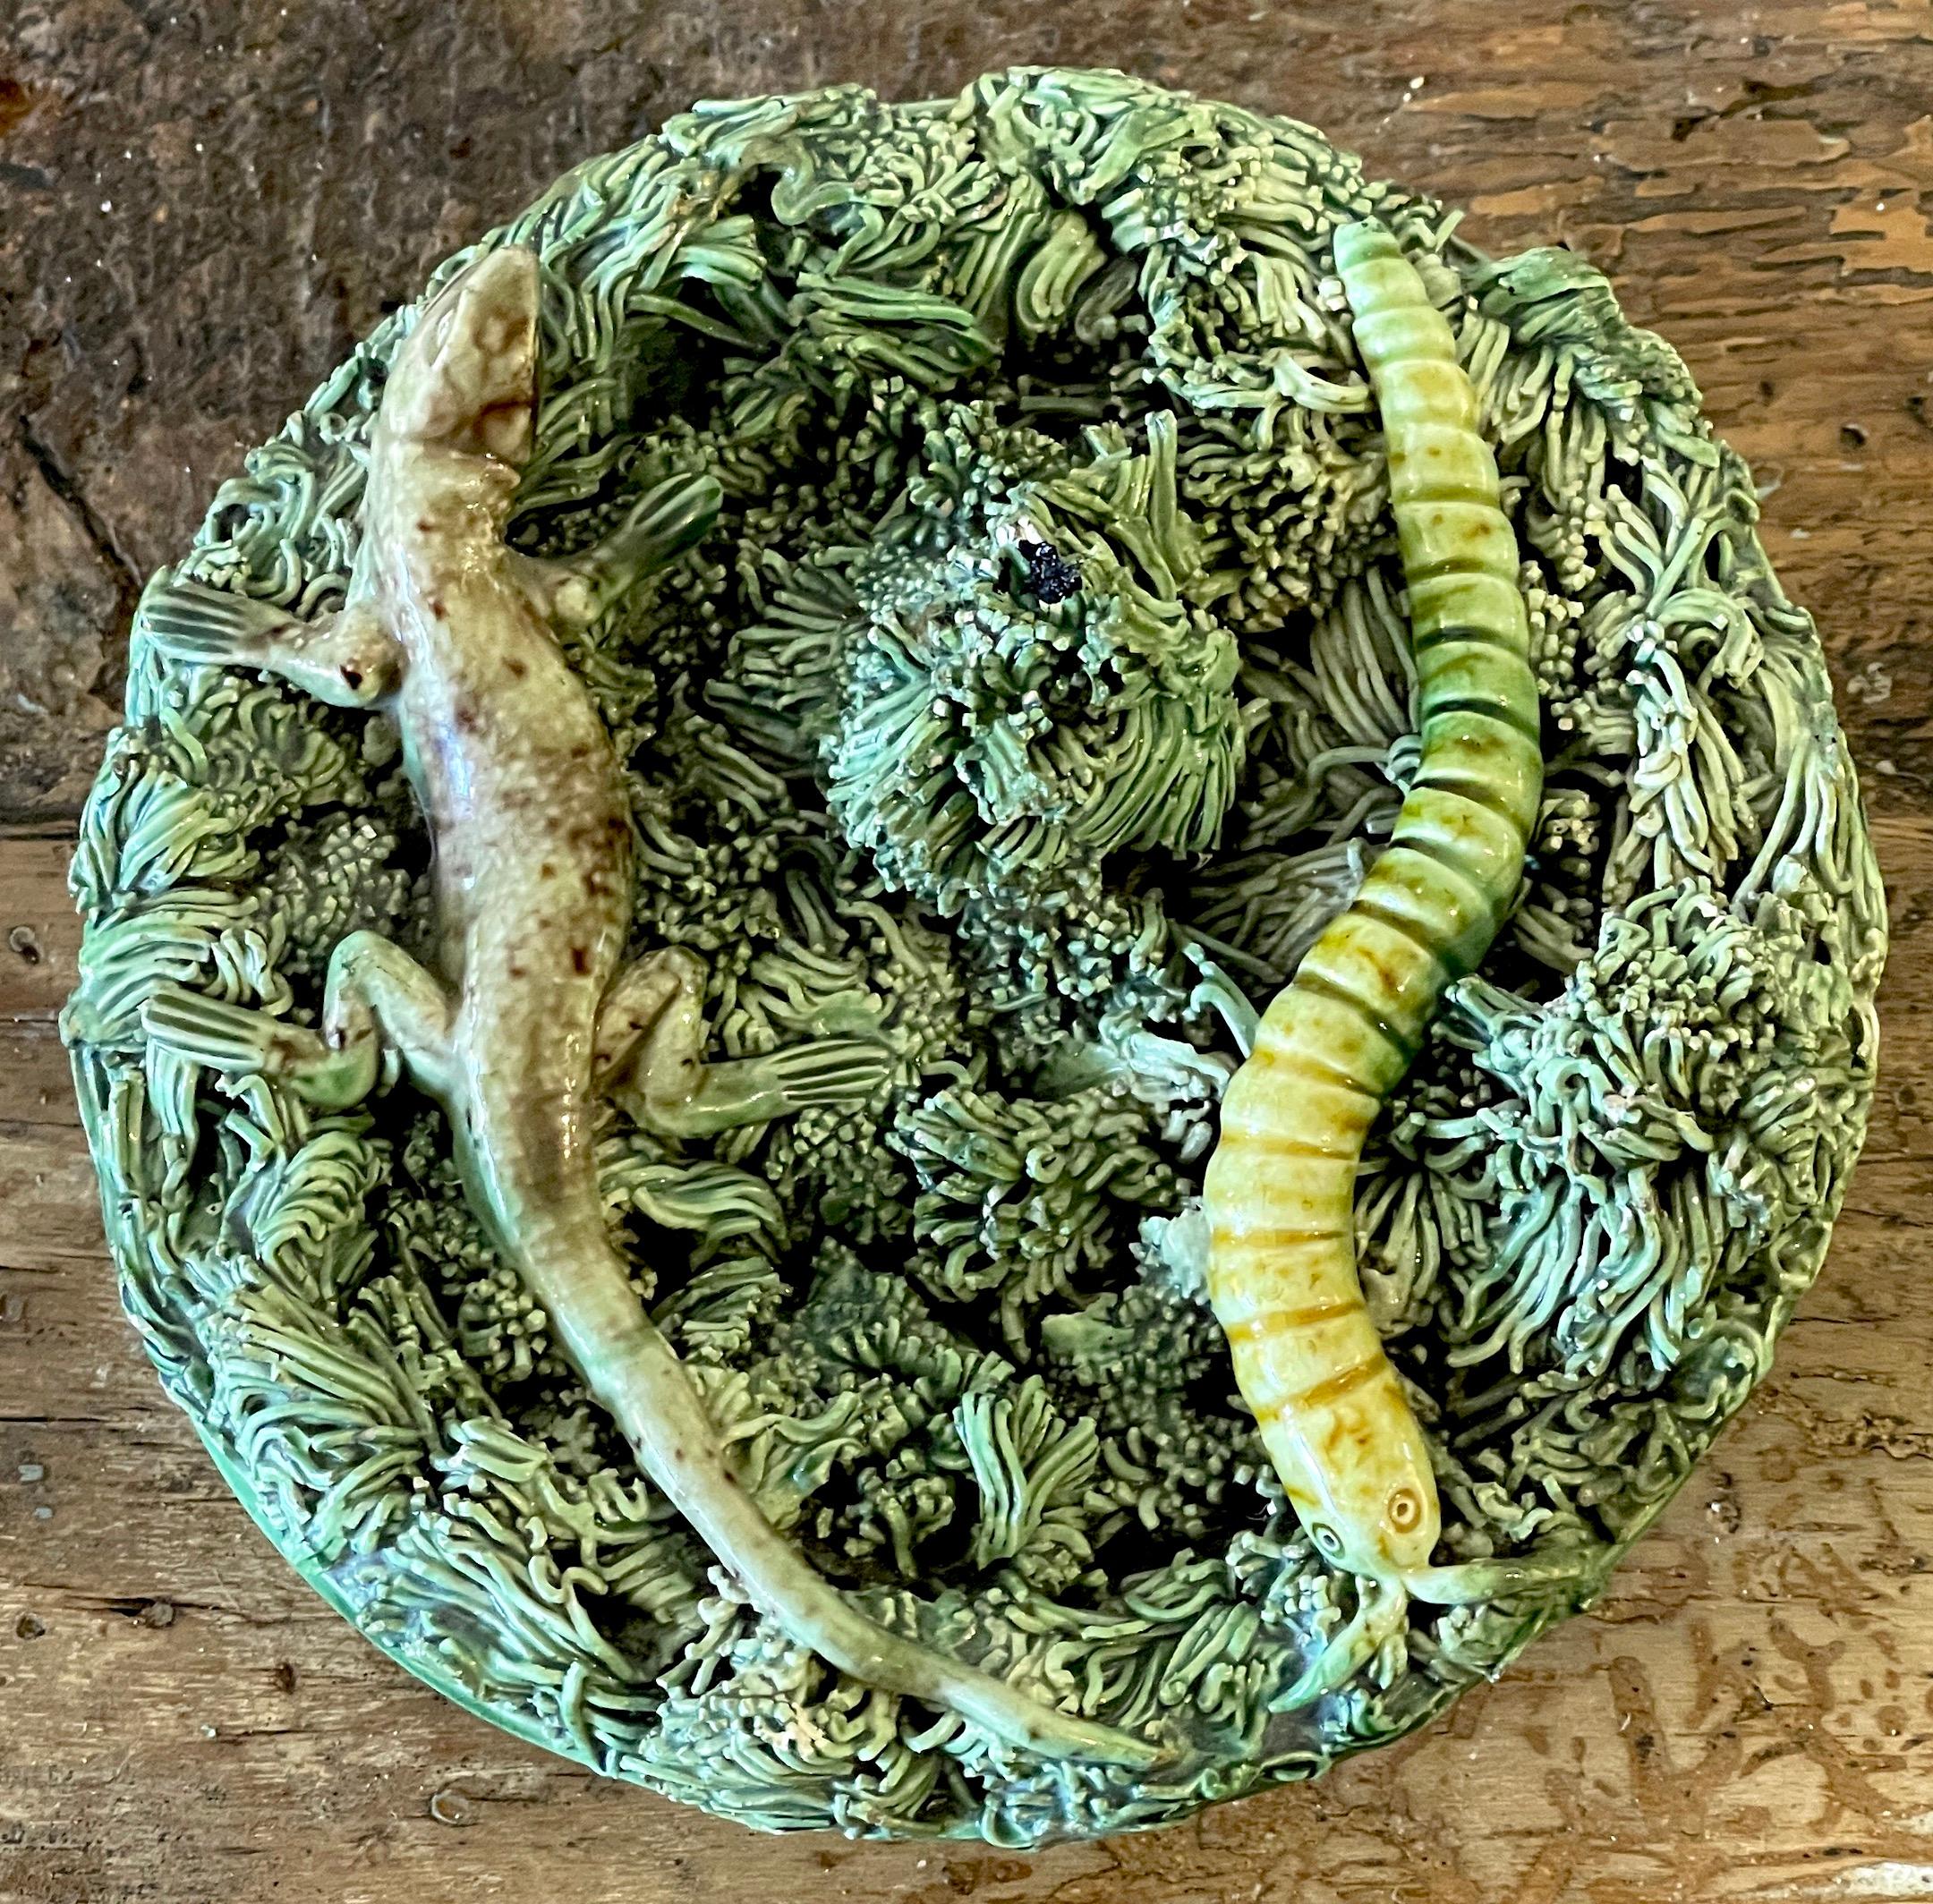 Palissy Majolica Aesthetic Miniature Plate, Caterpillar & Lizard
A unique diminutive example, With a applied Caterpillar & Lizard in a grassy background 